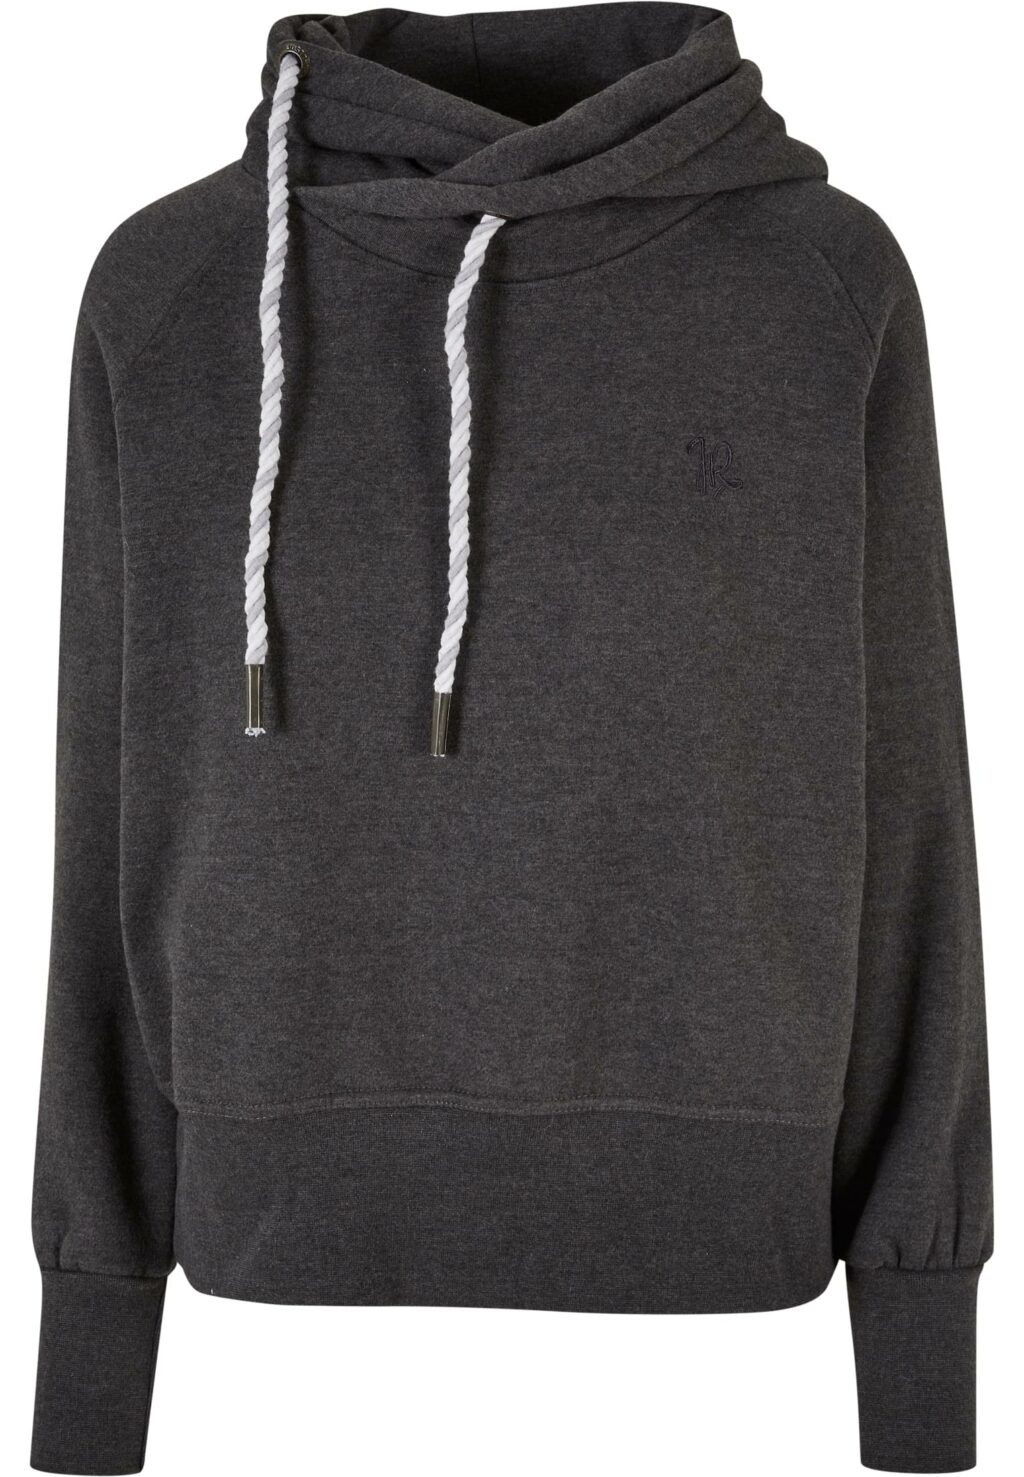 Just Rhyse Baileyville Hoody anthracite JLHD235